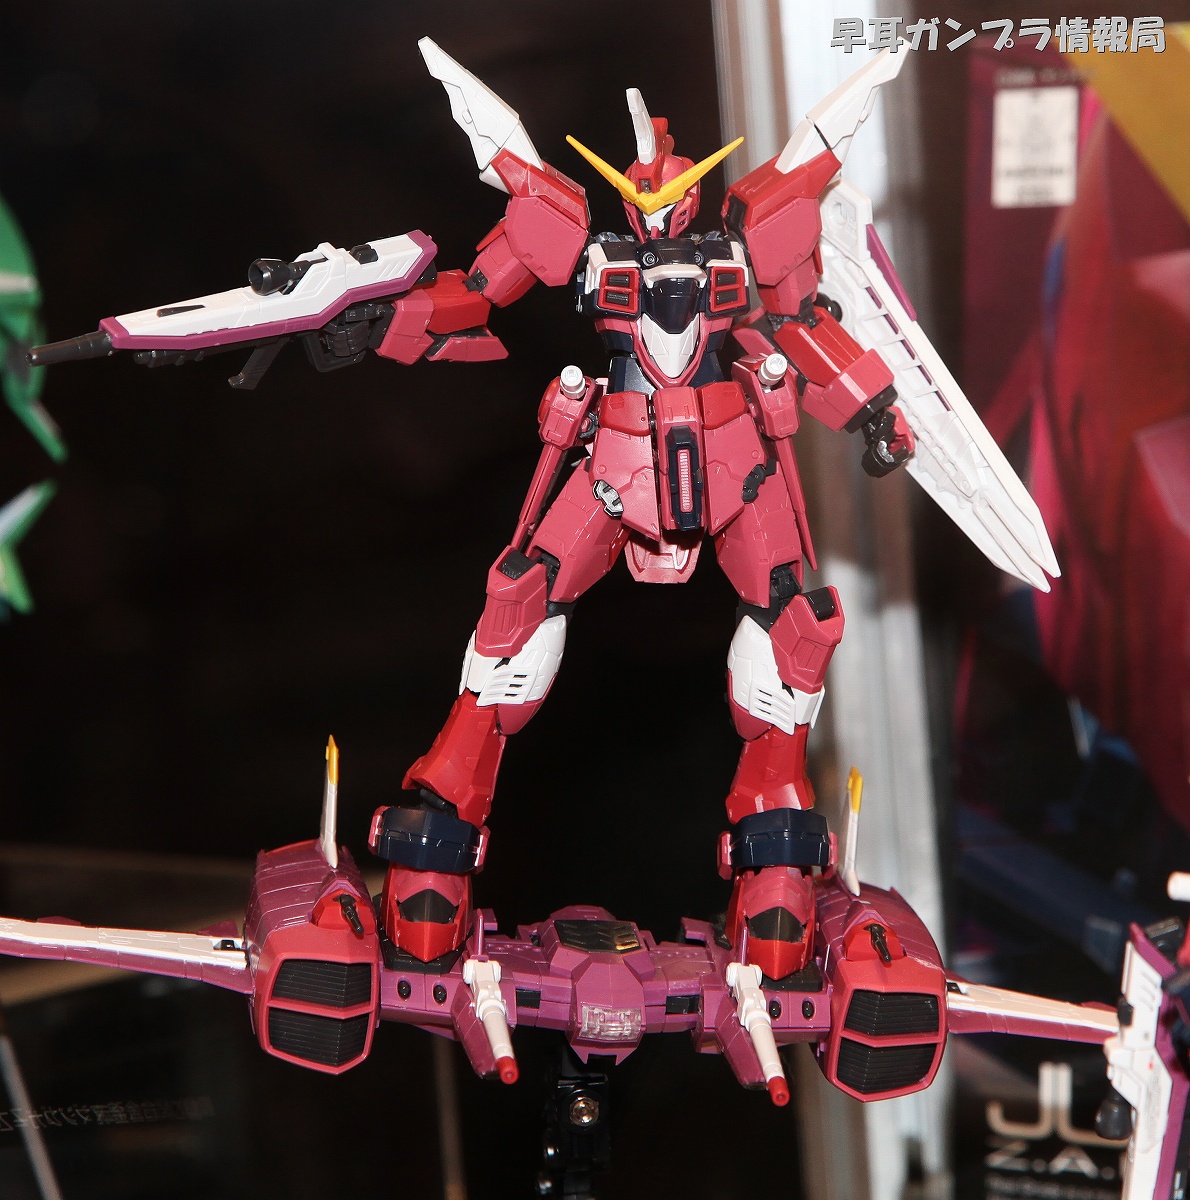 ... RG 1/144 Justice Gundam - Wallpaper Size Images @ Tokyo Toy Show 2012